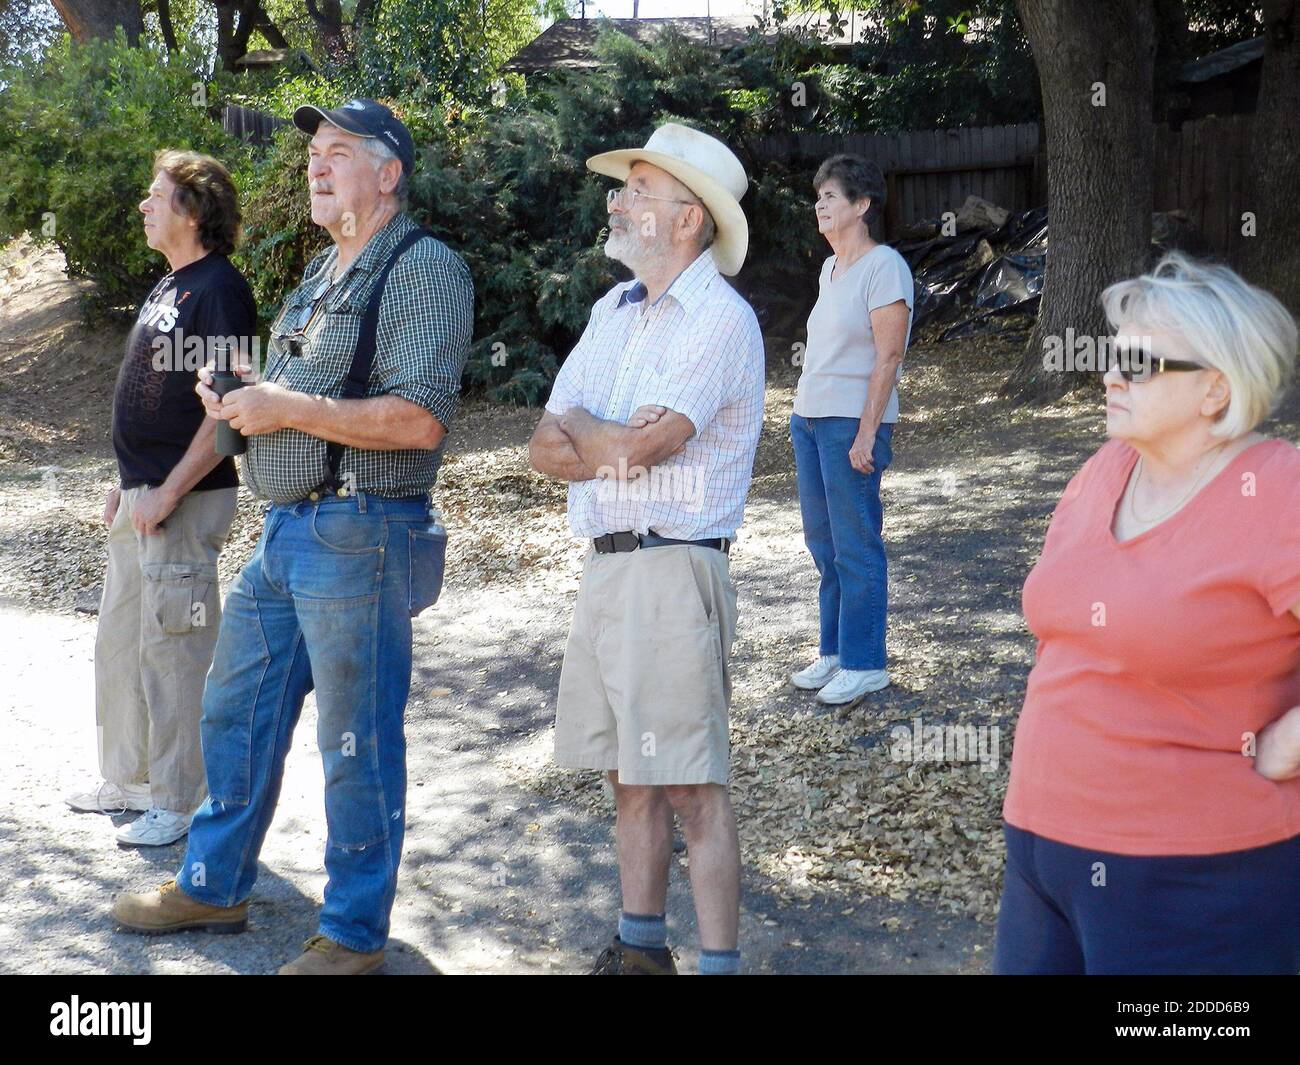 NO FILM, NO VIDEO, NO TV, NO DOCUMENTARY - Mike Sanders, 2nd from left, Rick Jerome, center, and Susan Starr, far right, watch the Rim fire with other neighbors in front of Starr's home on Canyon Drive near Tuolumne City, California, USA, Sunday, August 25, 2013. Photo by Jeff Jardine/Modesto Bee/MCT/ABACAPRESS.COM Stock Photo